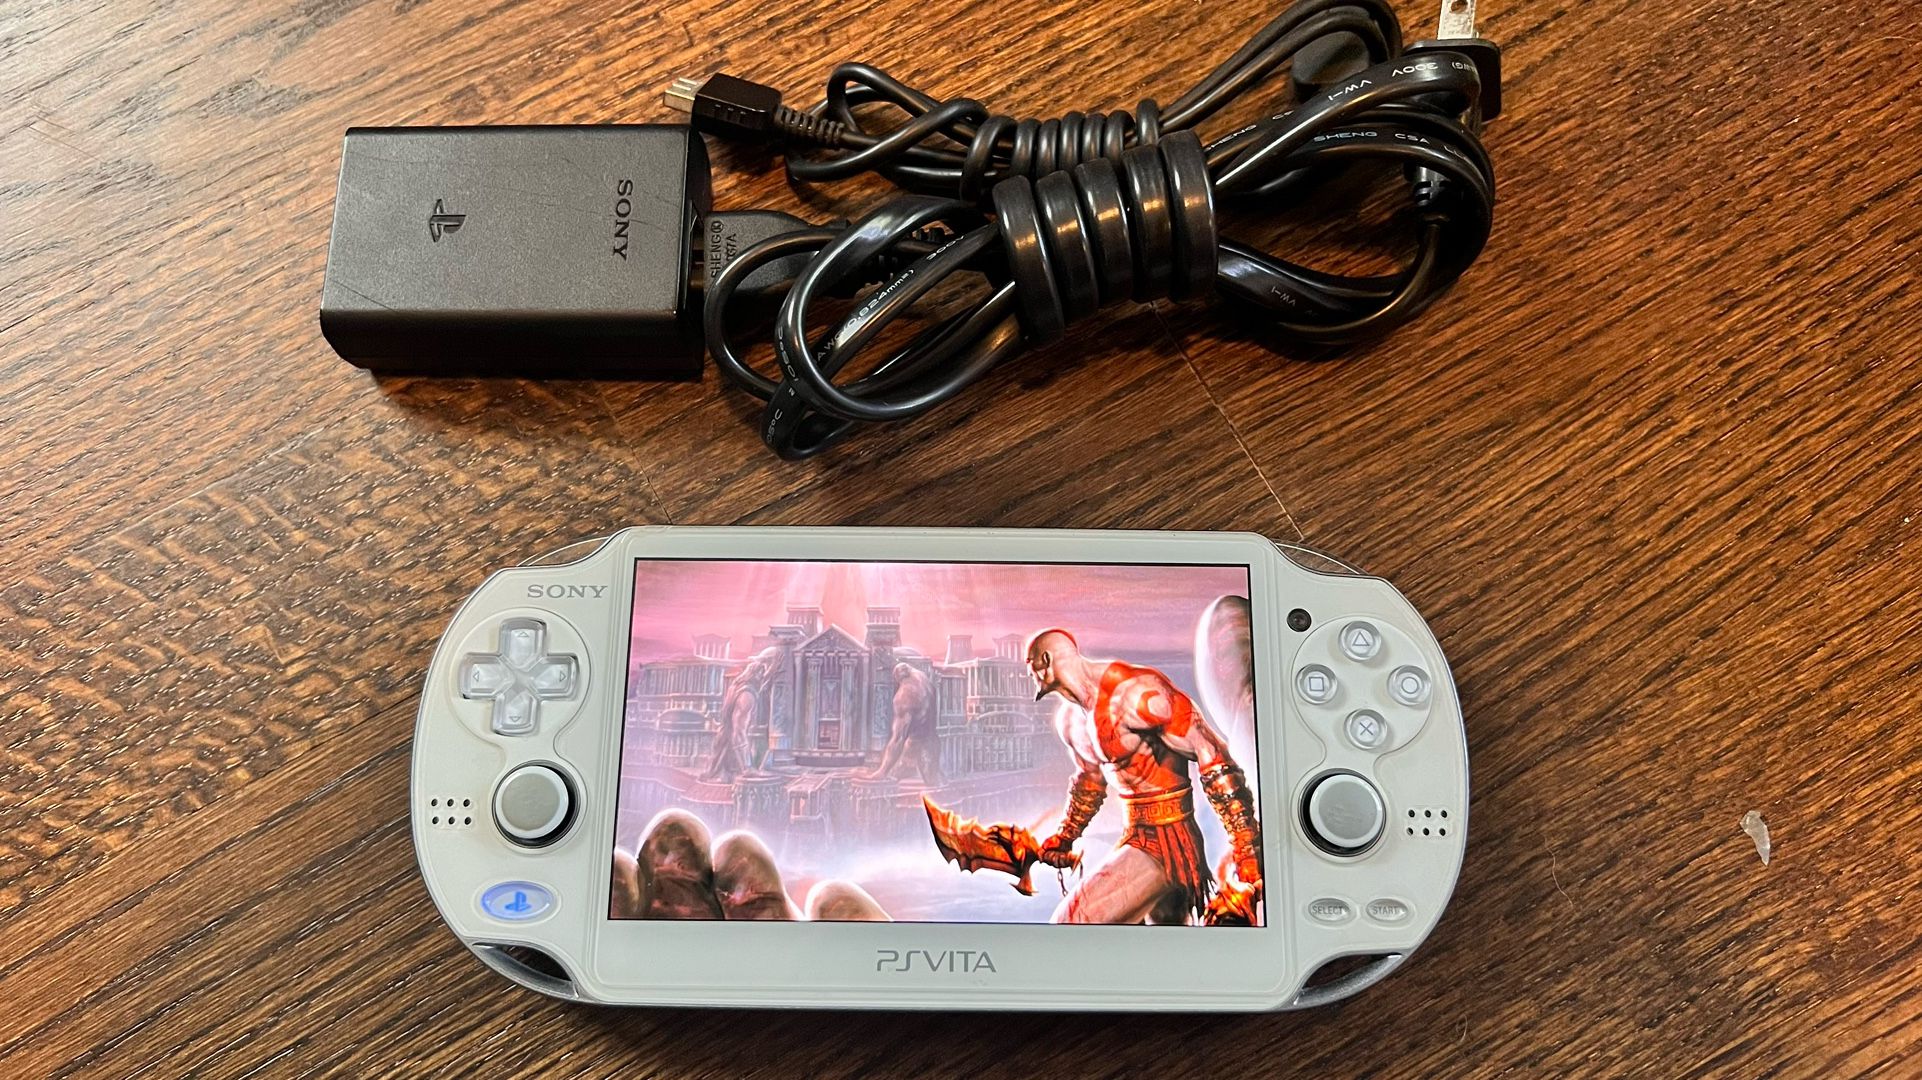 Modded PlayStation Vita OLED 1001 - Loaded With Games